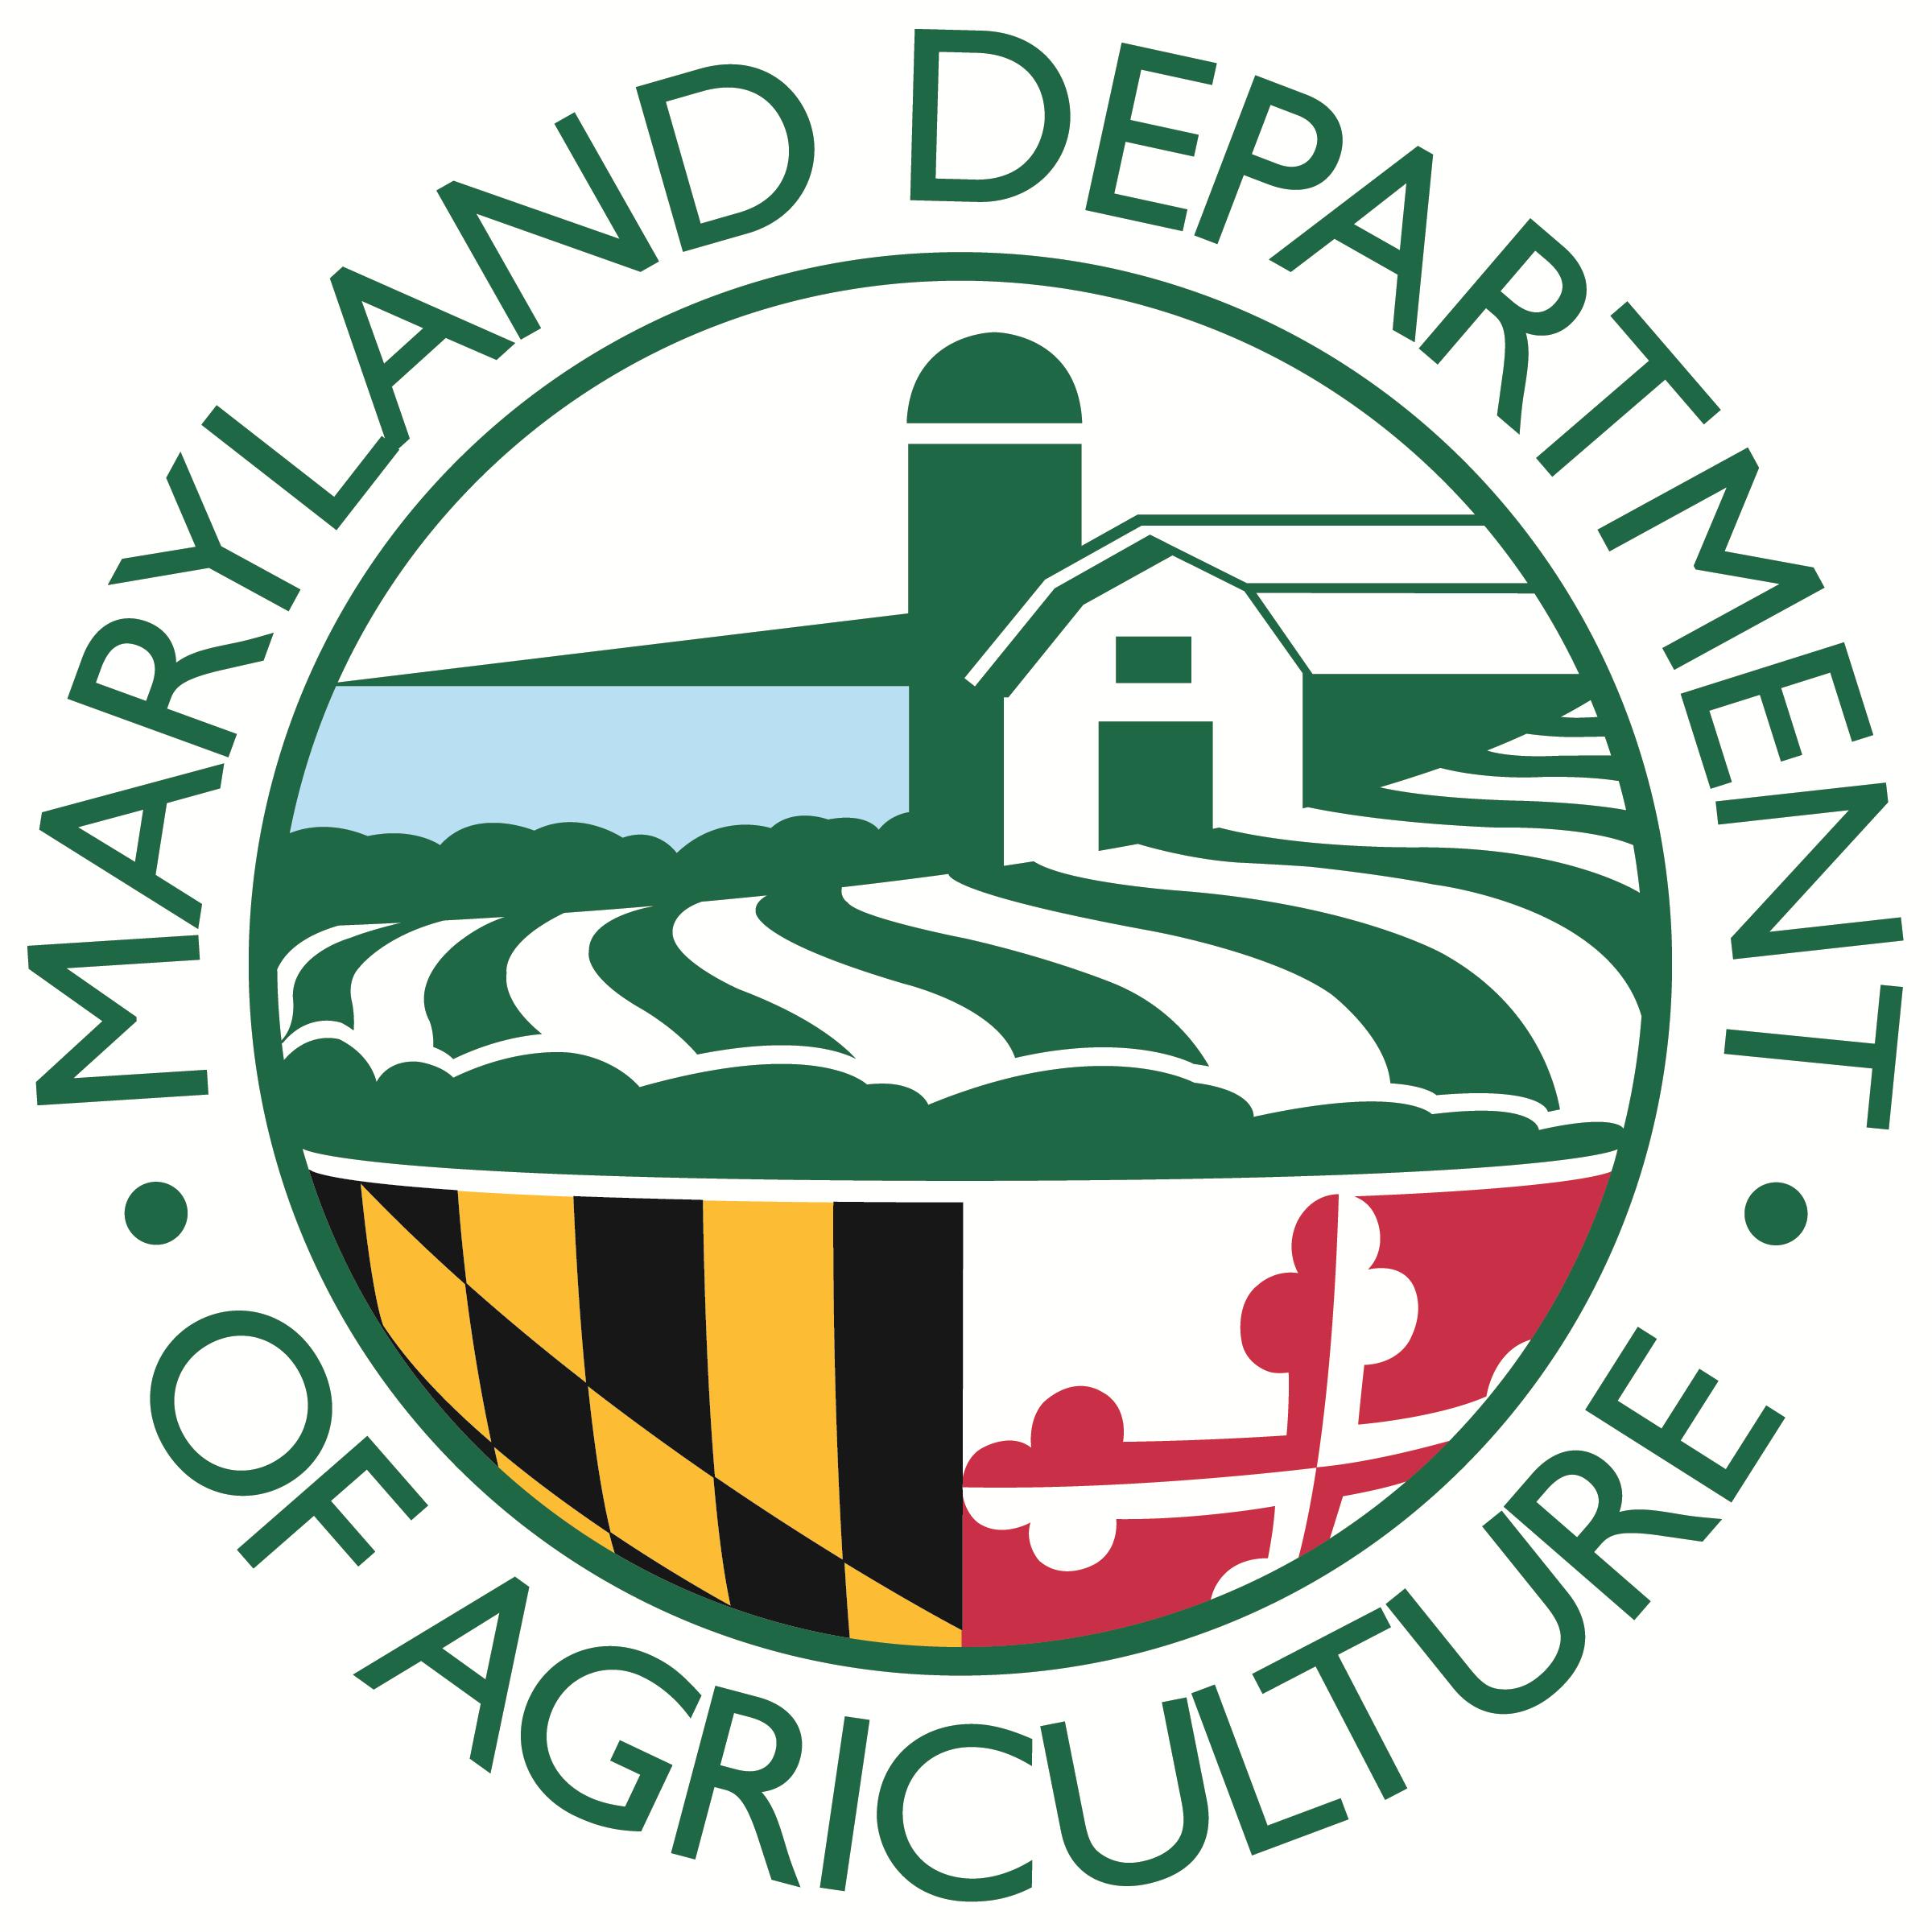 Maryland Dept. of Ag Resource Conservation Unit is Hiring!